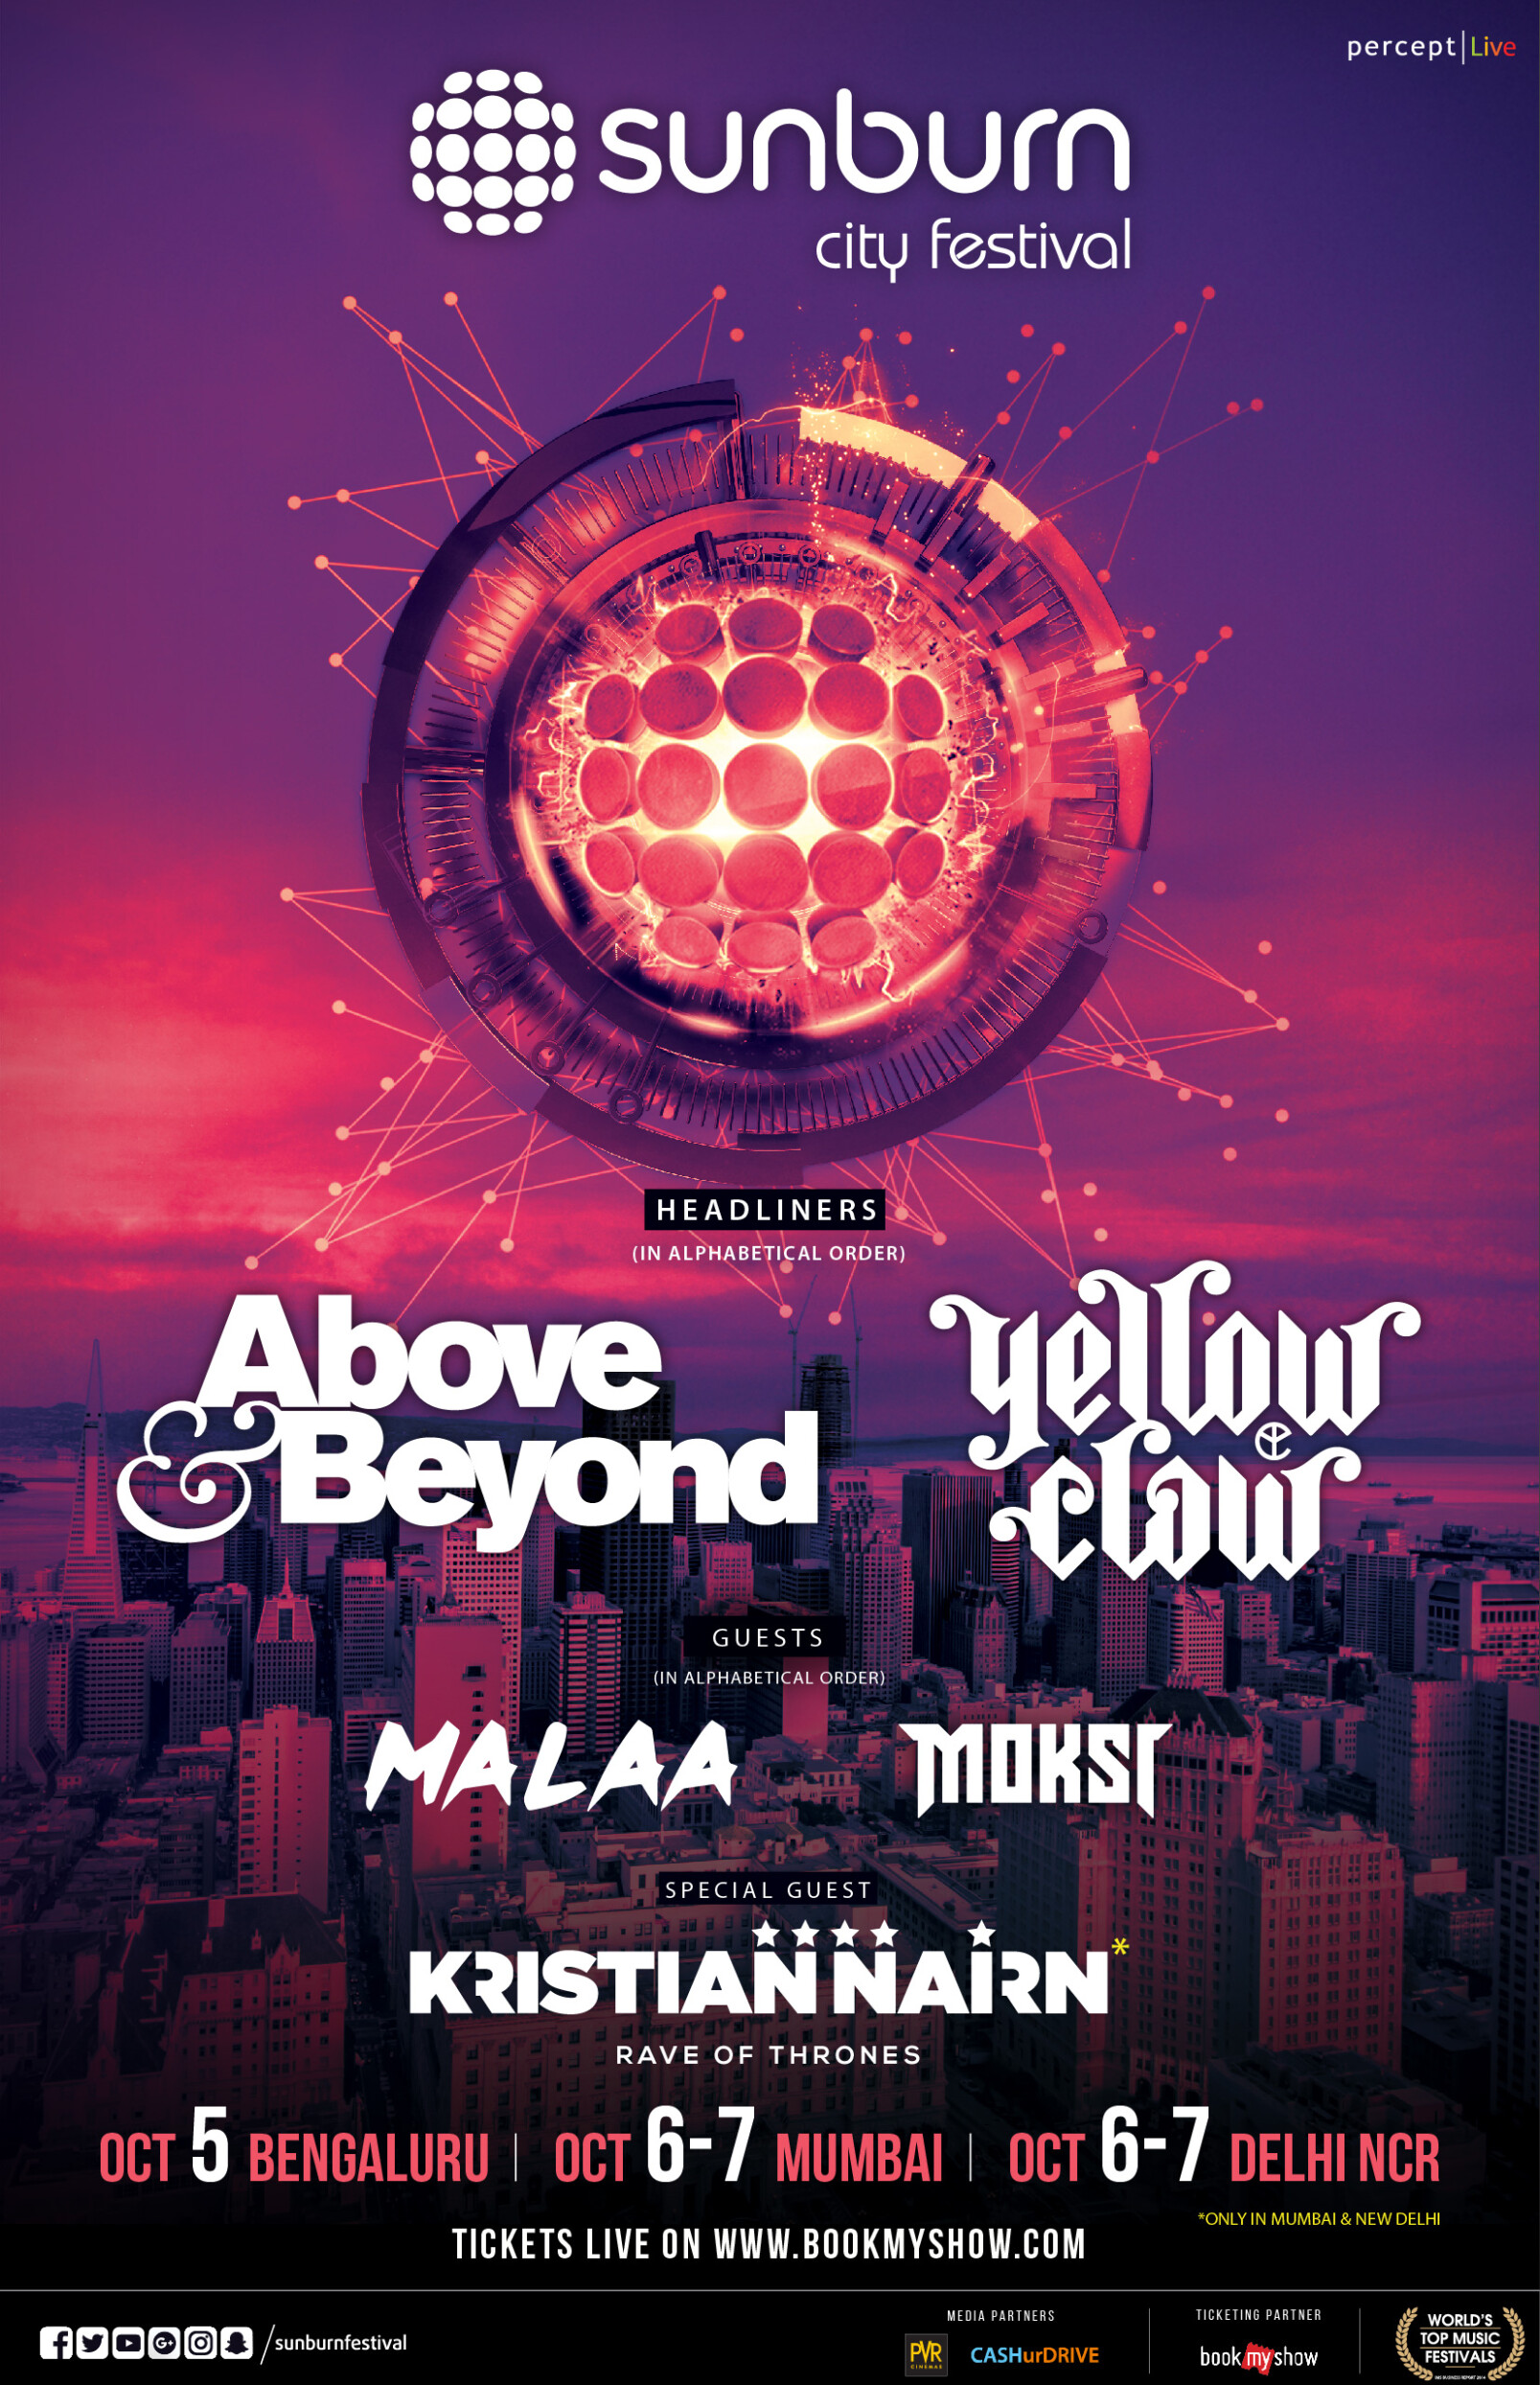 Sunburn City Festival to be held in Mumbai on October 6 and 7, 2018